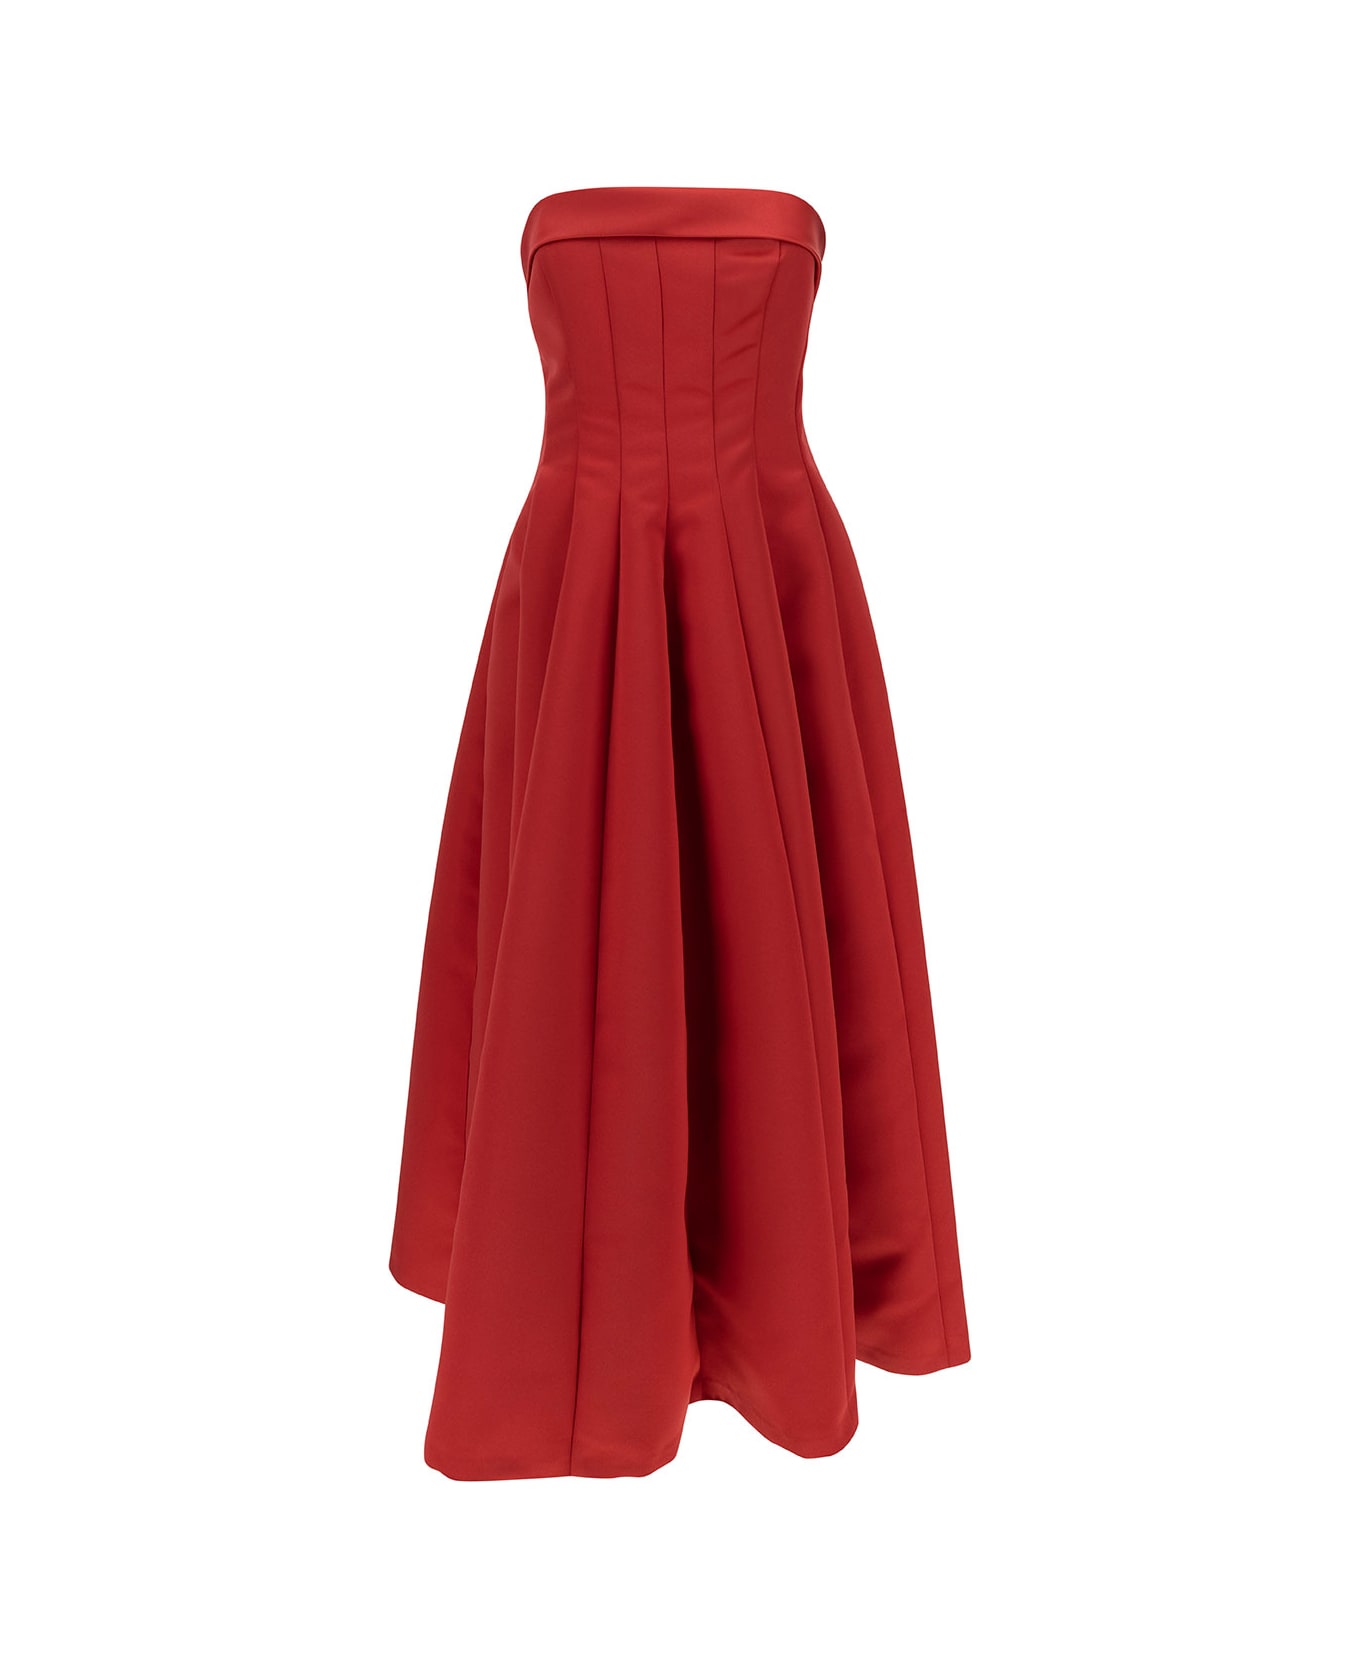 Philosophy di Lorenzo Serafini Longuette Red Dress With Flared Skirt In Duchesse Woman - Red ワンピース＆ドレス